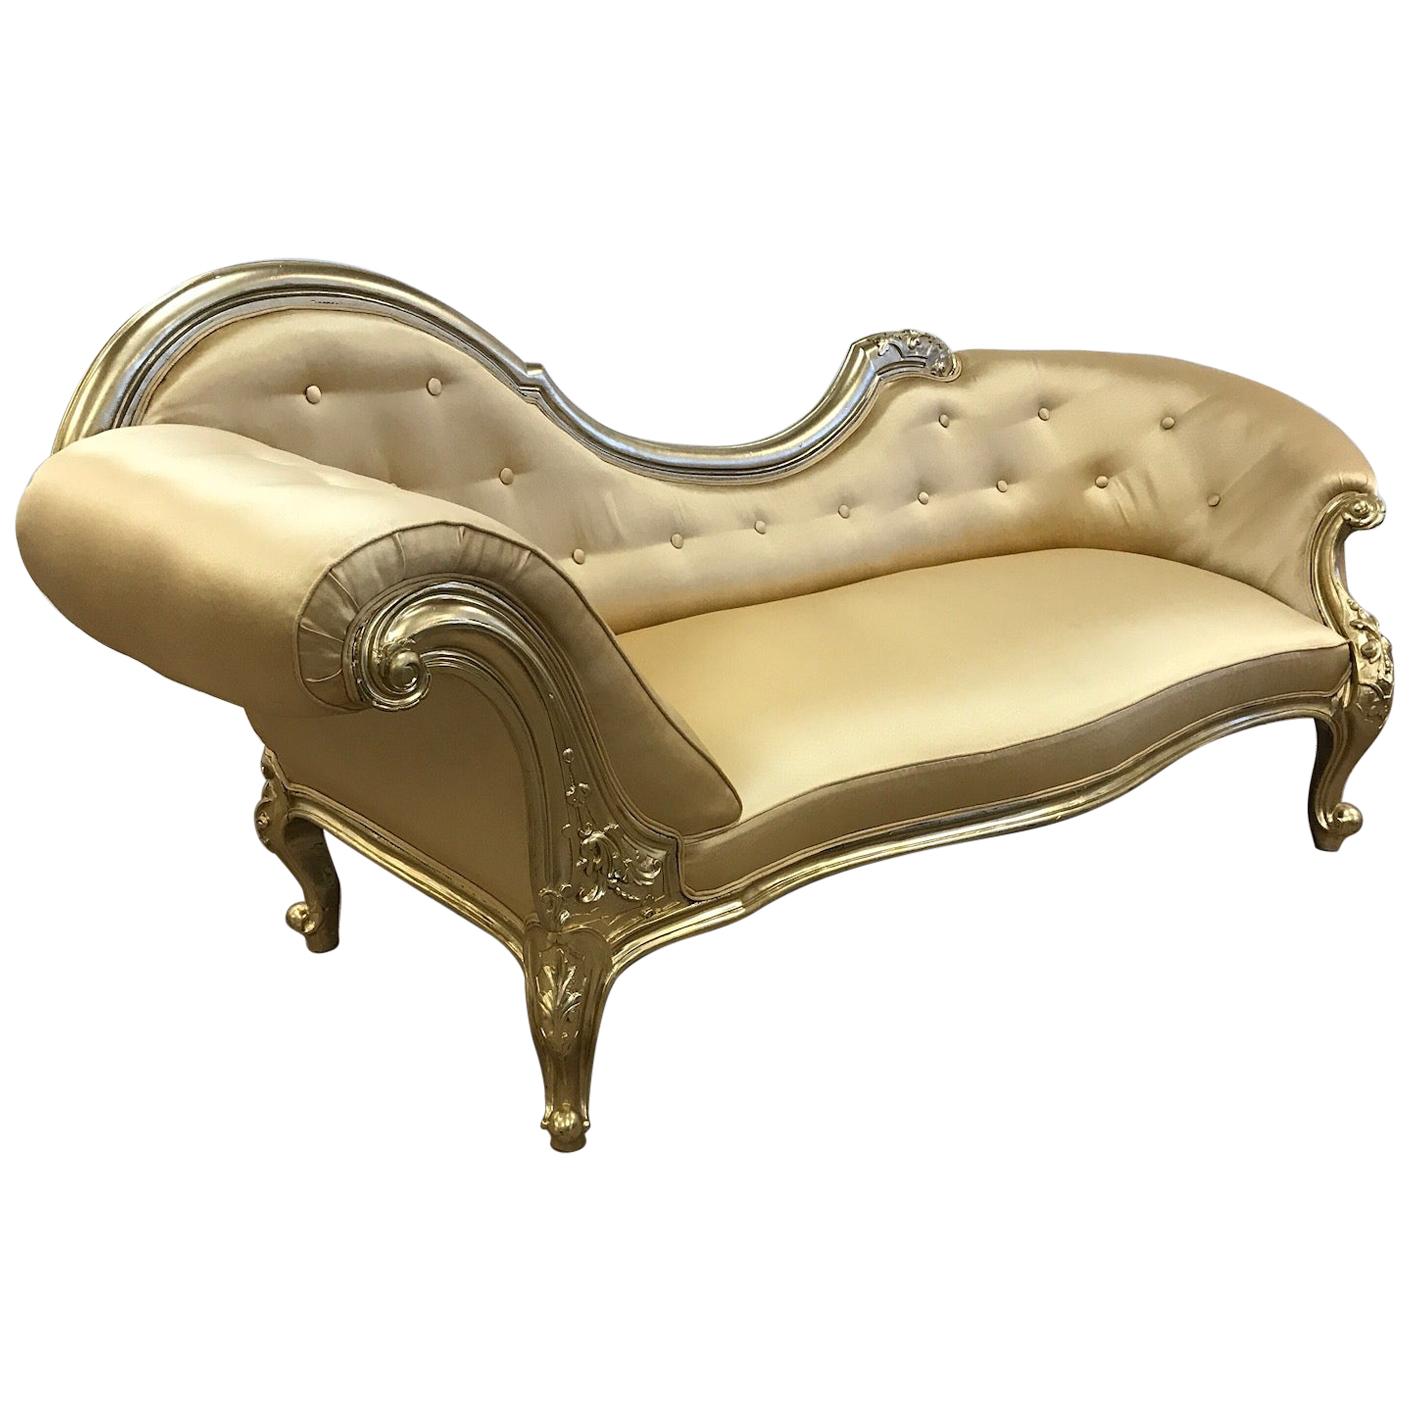 Victorian Chaise Lounge with Metallic Gold Finish Upholstered in Satin